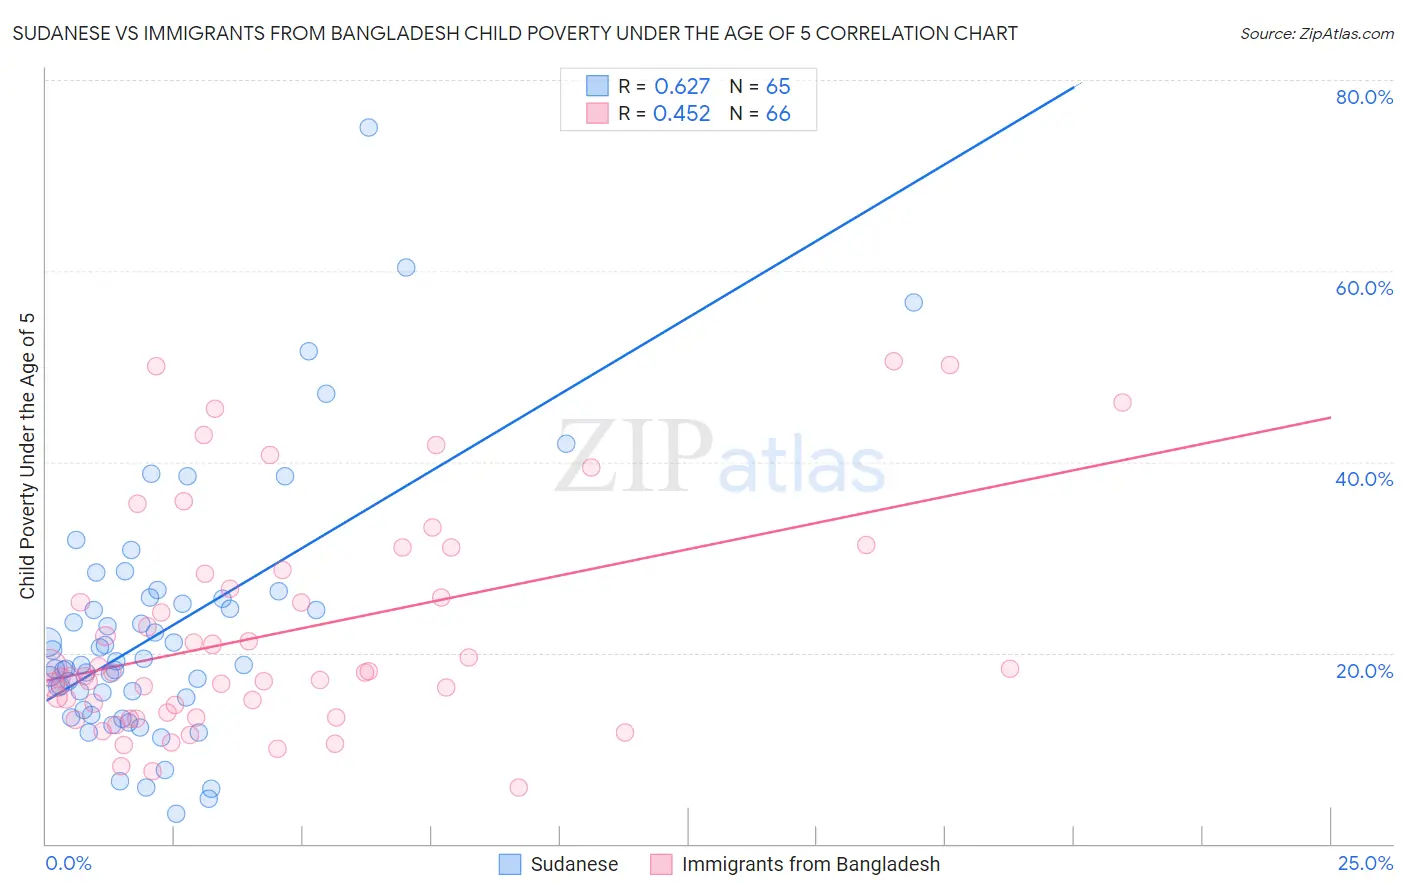 Sudanese vs Immigrants from Bangladesh Child Poverty Under the Age of 5